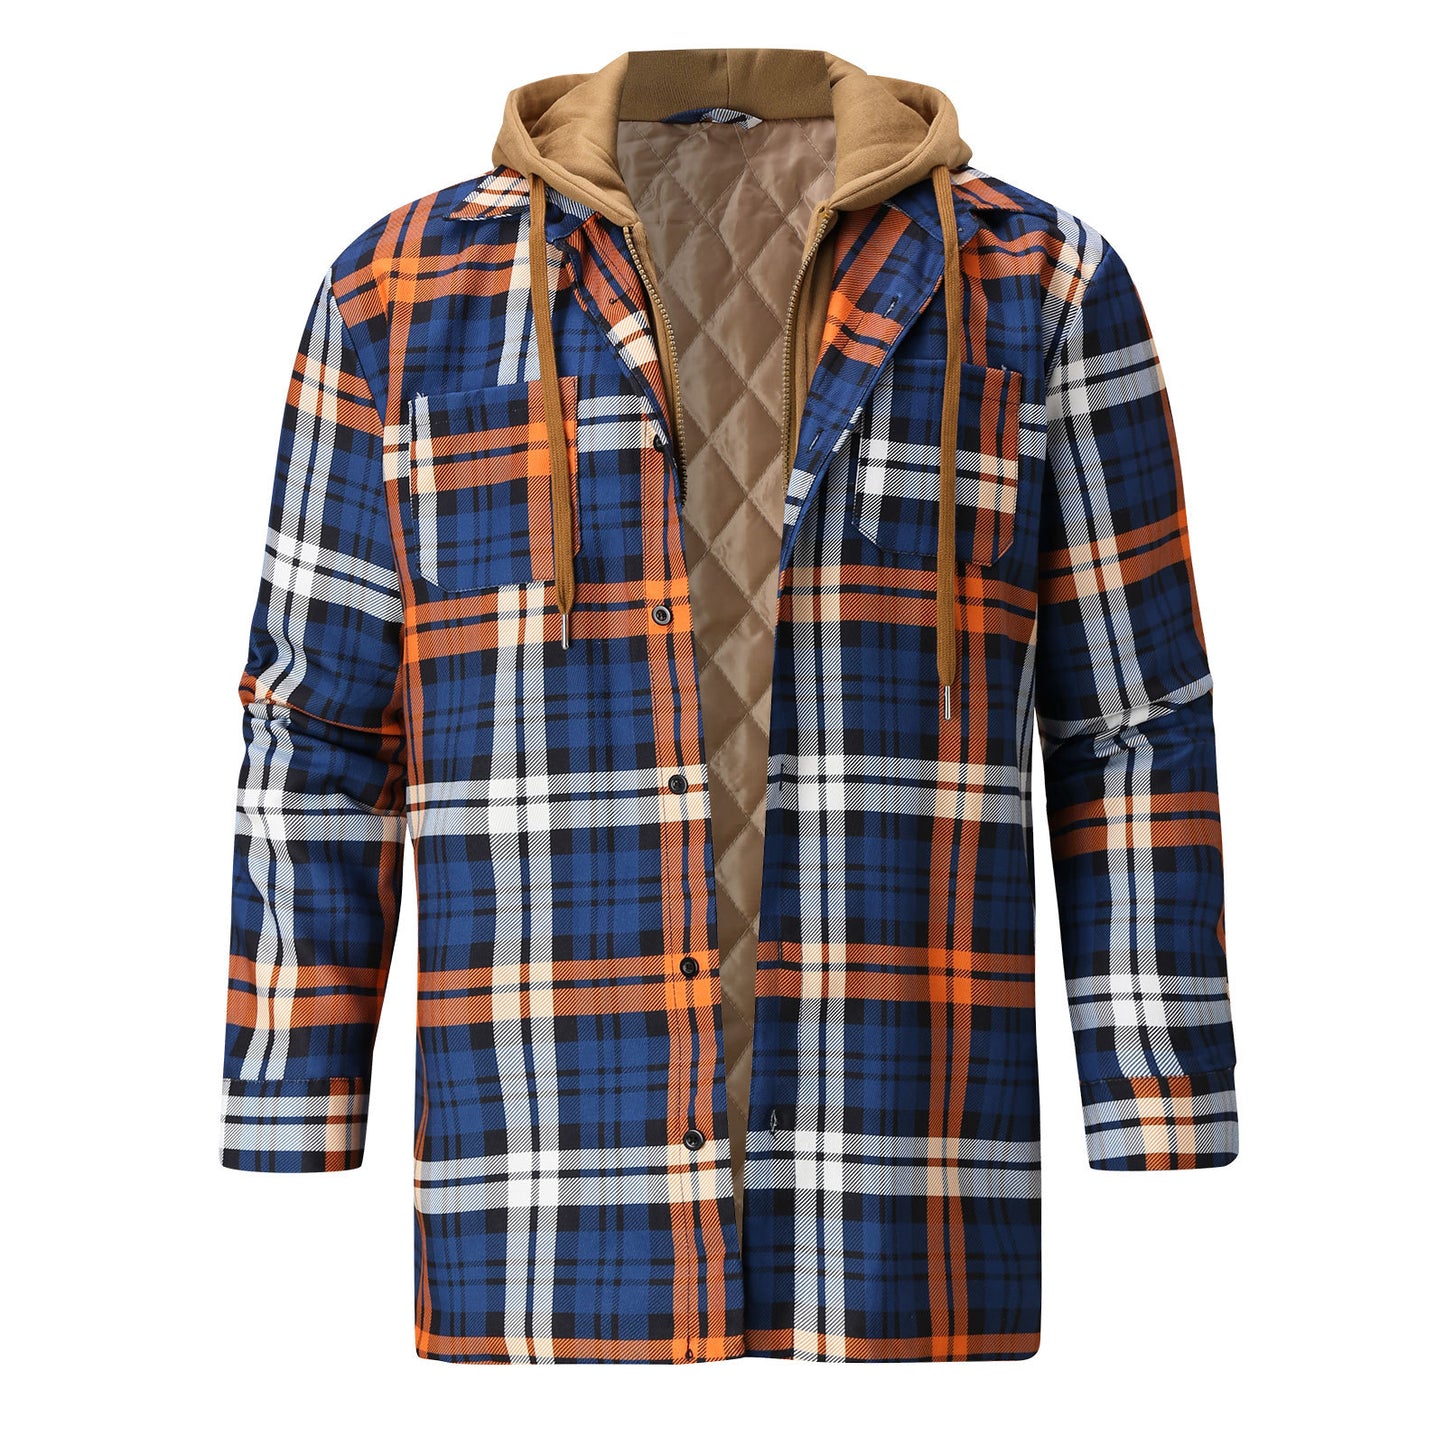 Men's Fashion Casual Non-location Print Hooded Jacket